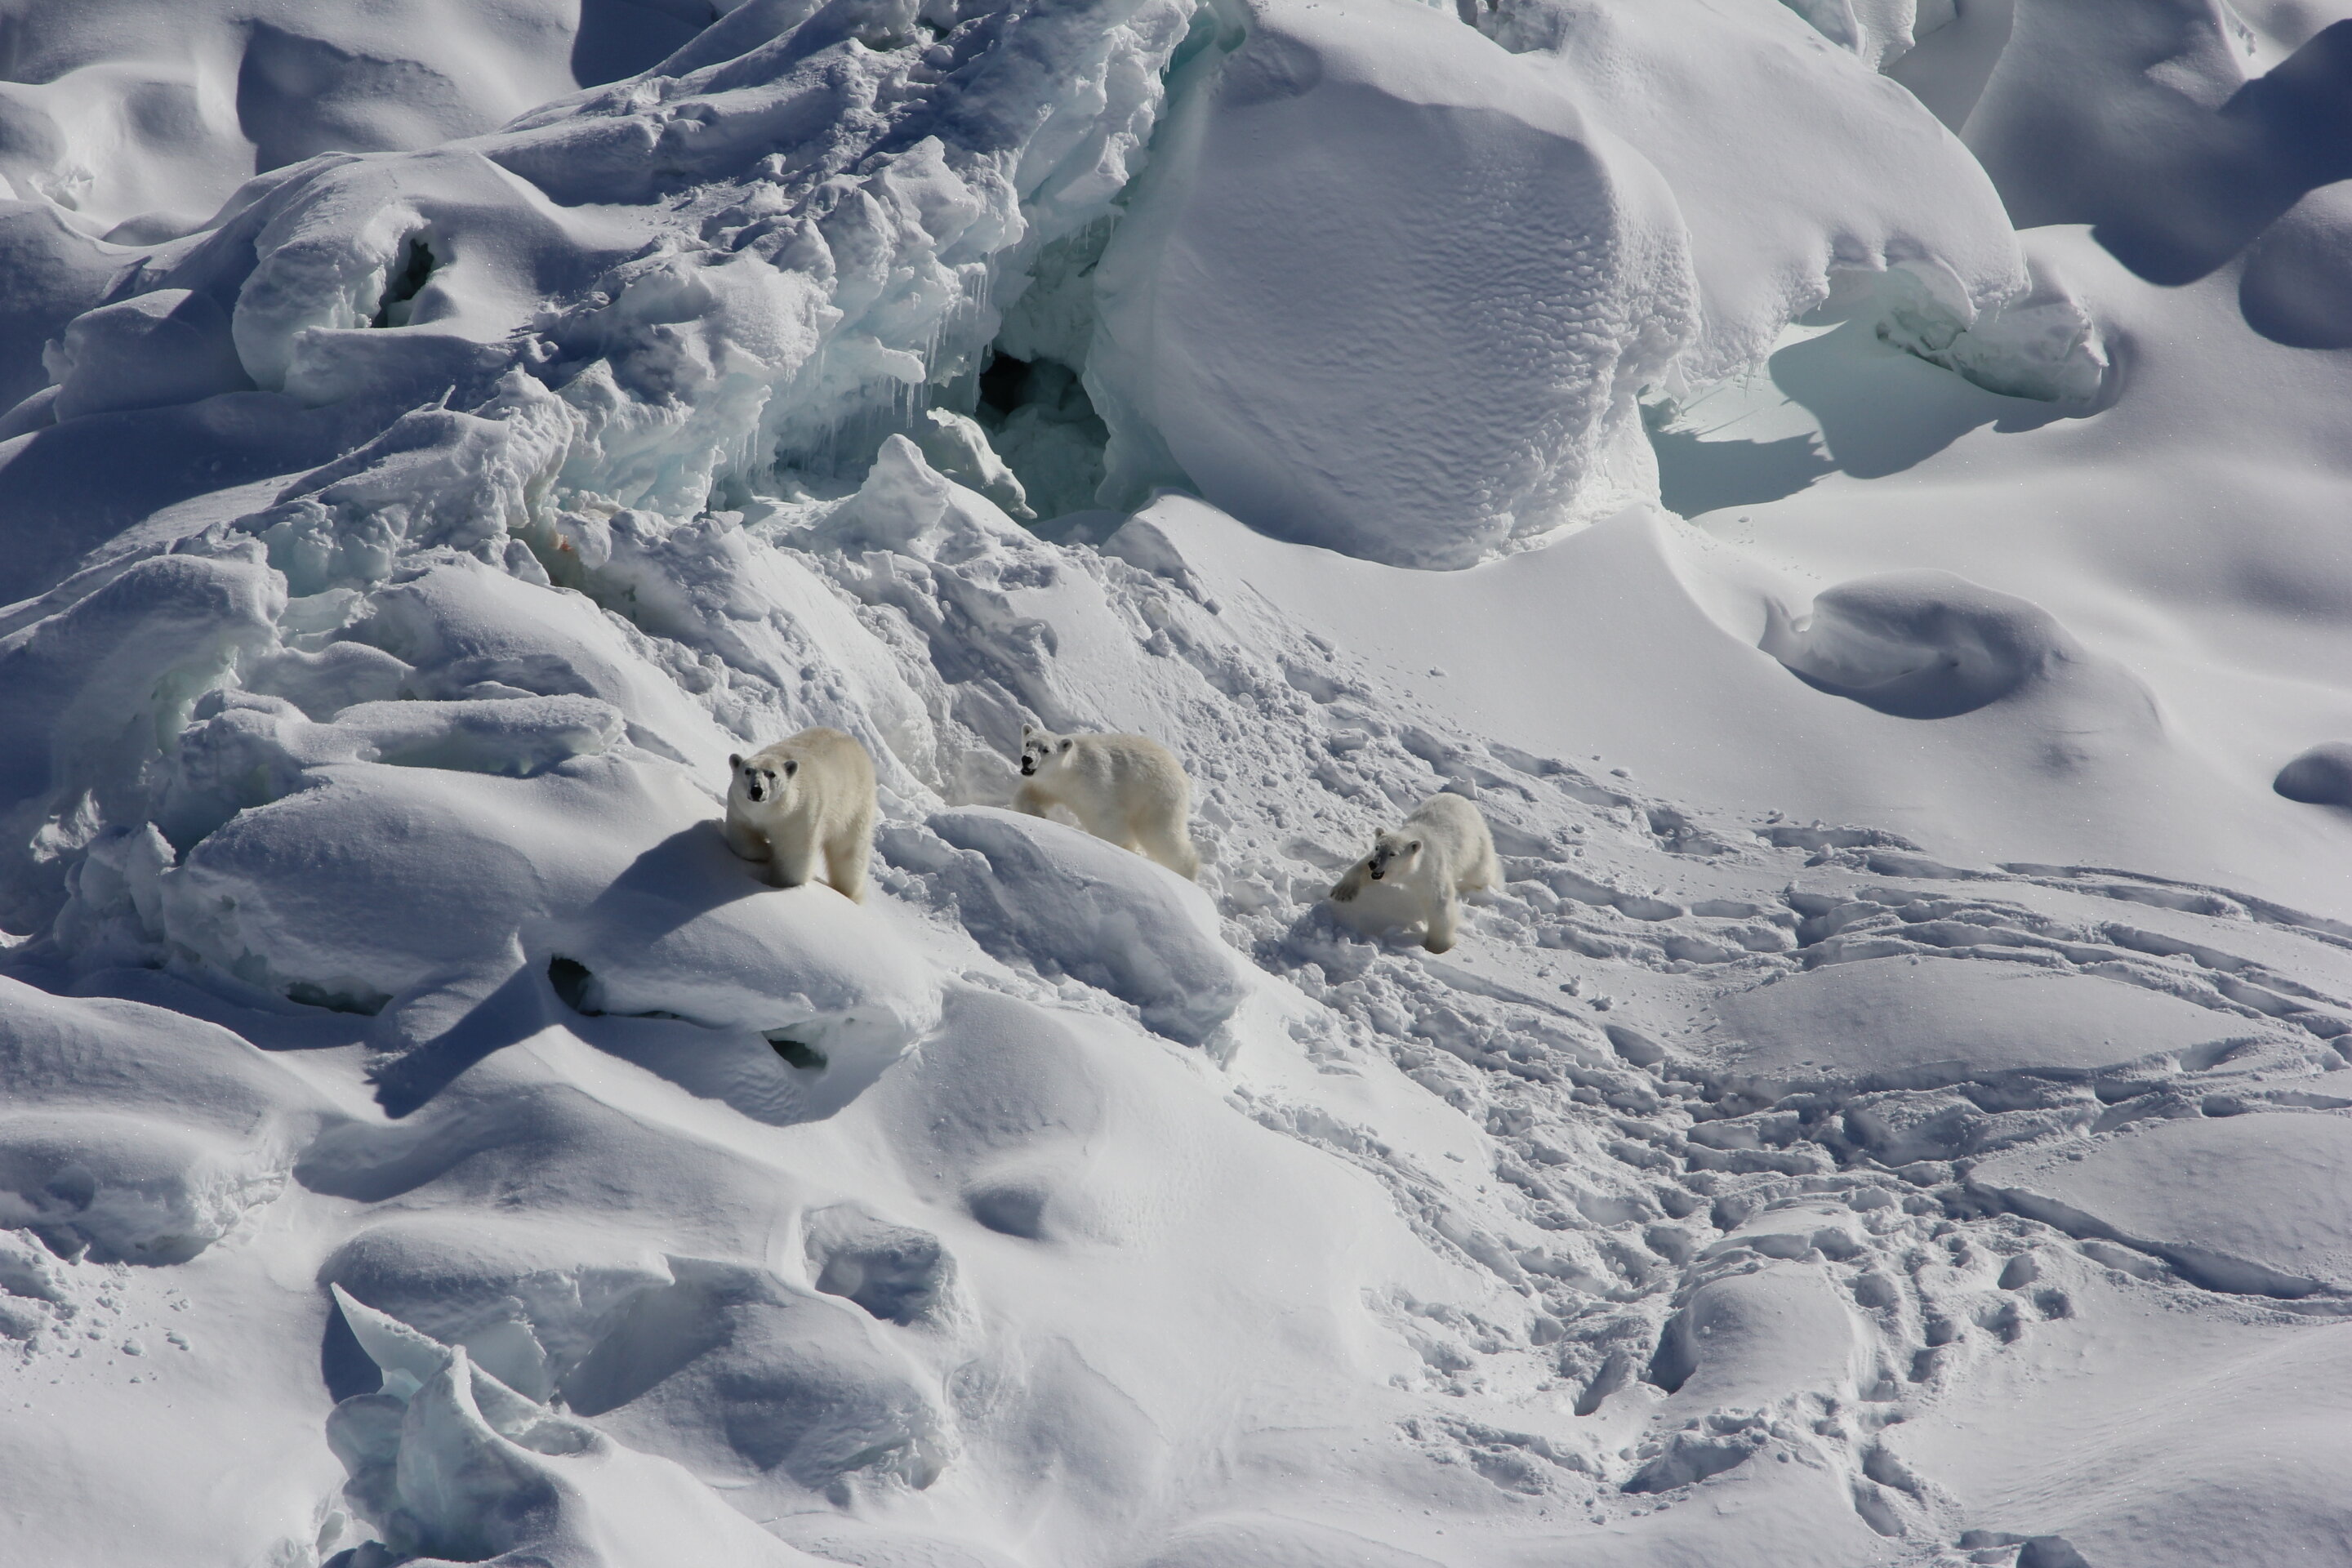 #Shaky oasis for some polar bears found, but not for species